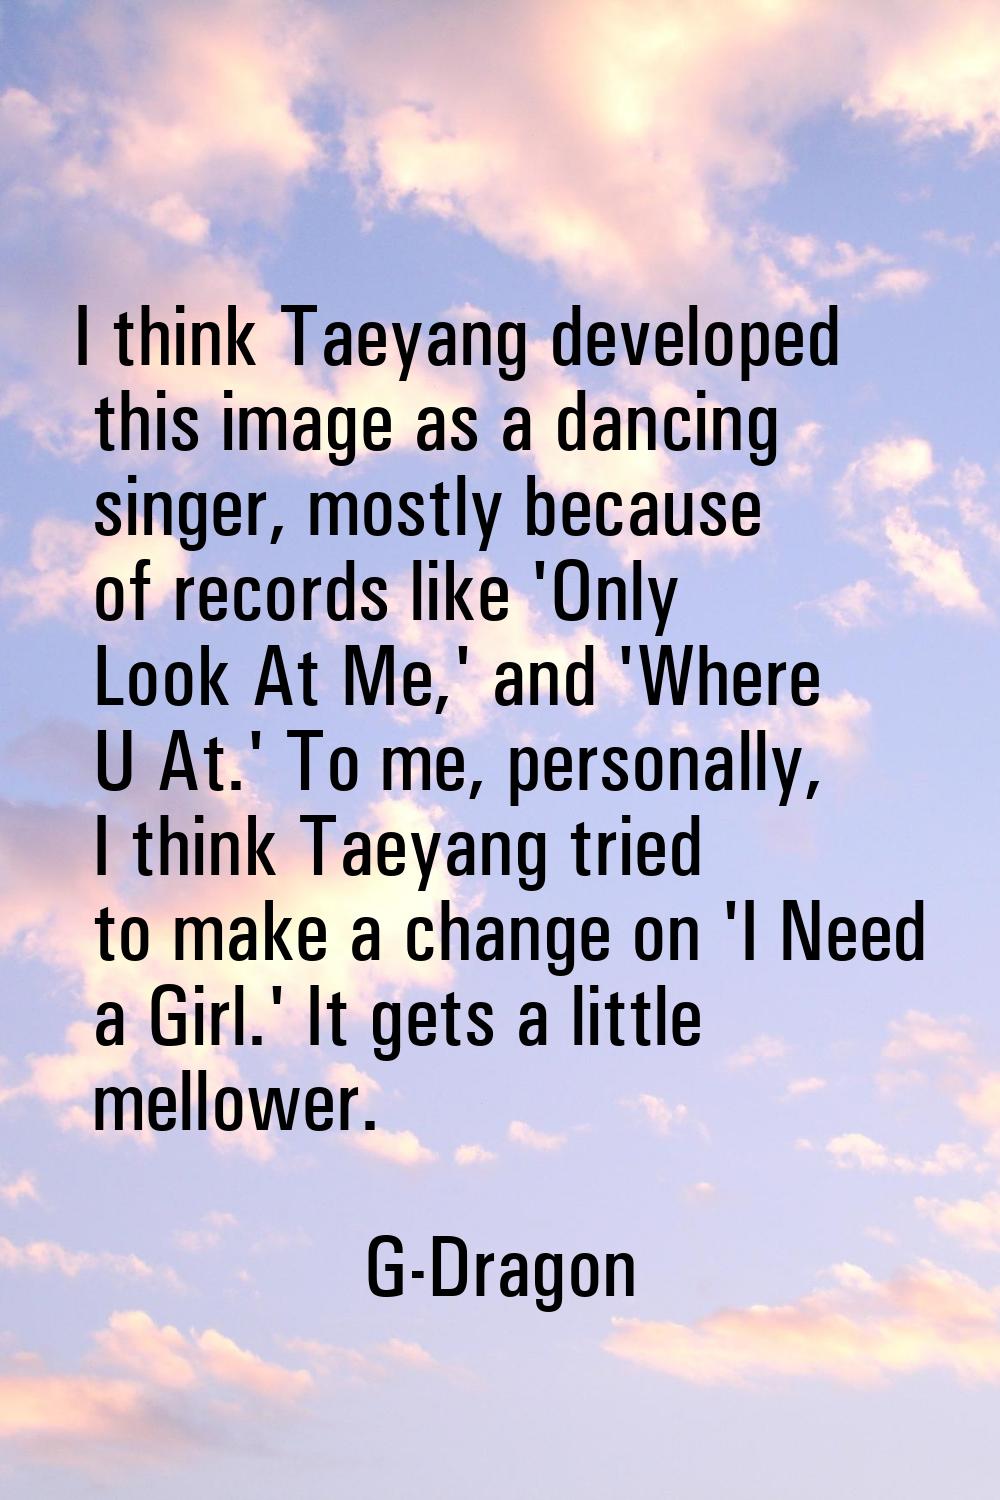 I think Taeyang developed this image as a dancing singer, mostly because of records like 'Only Look